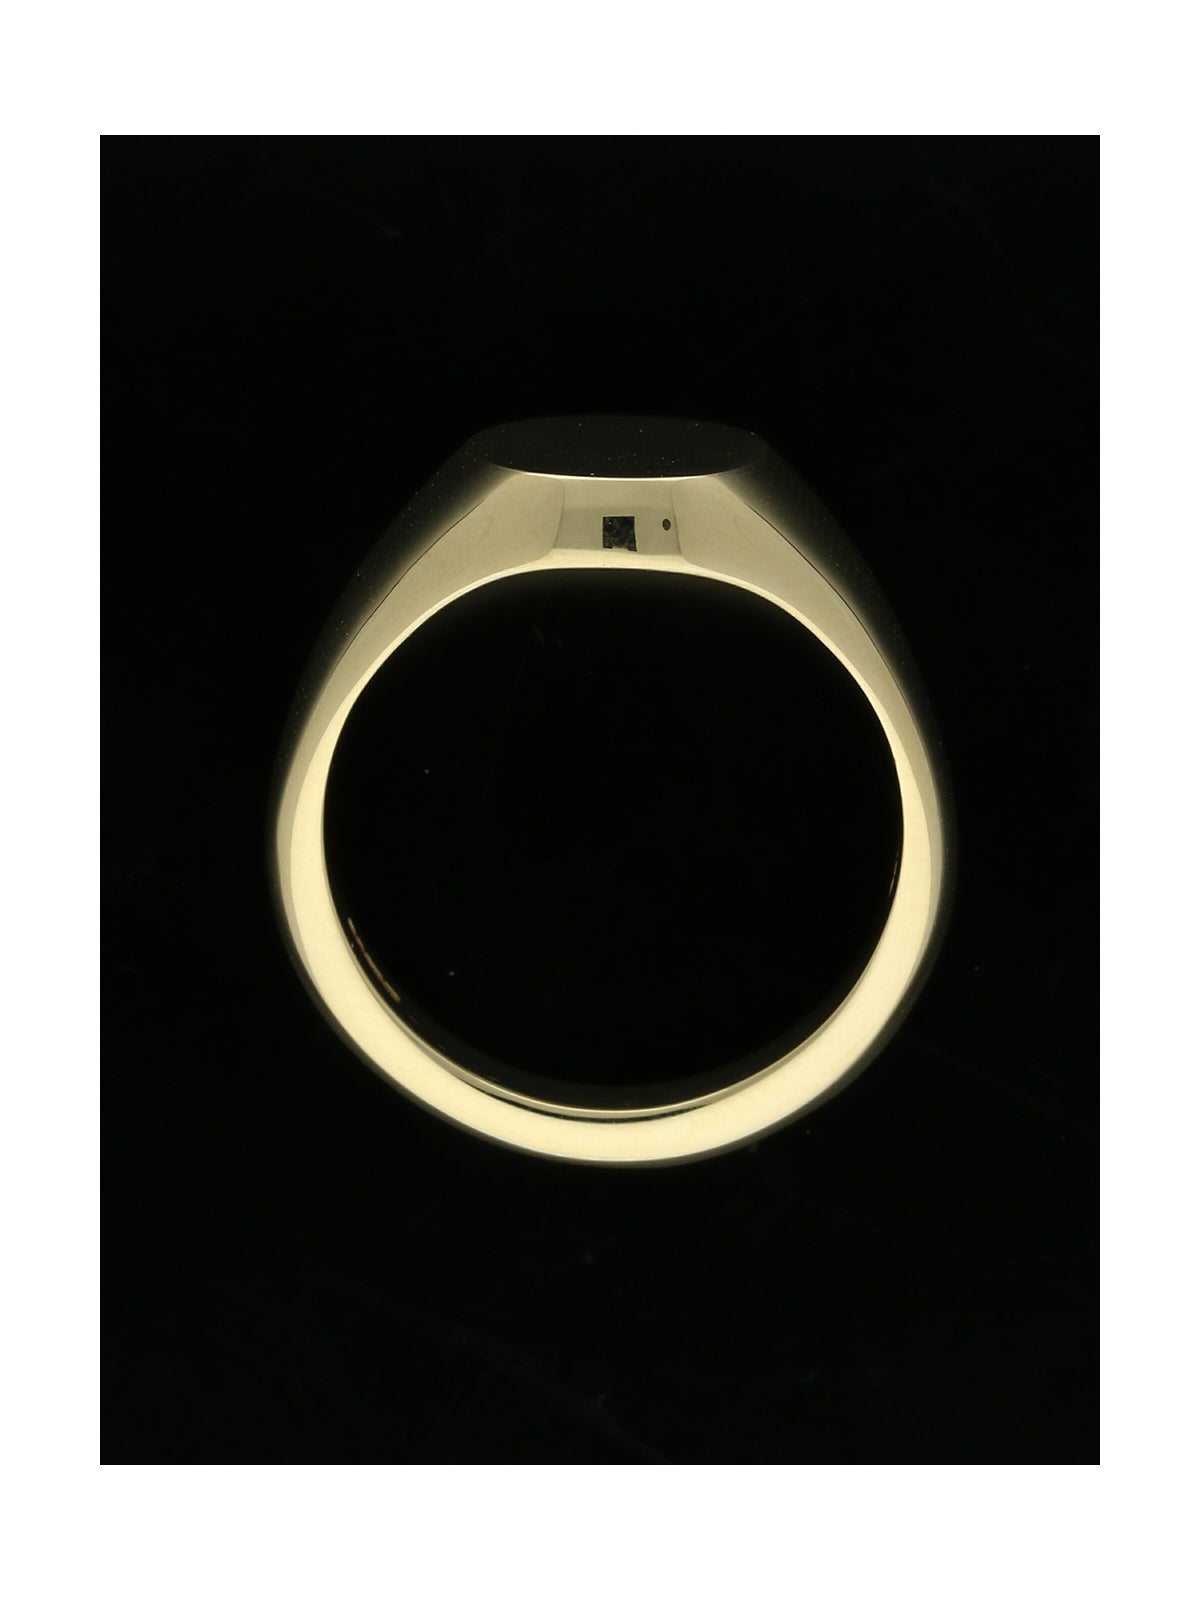 Plain Oval Signet Ring in 9ct Yellow Gold